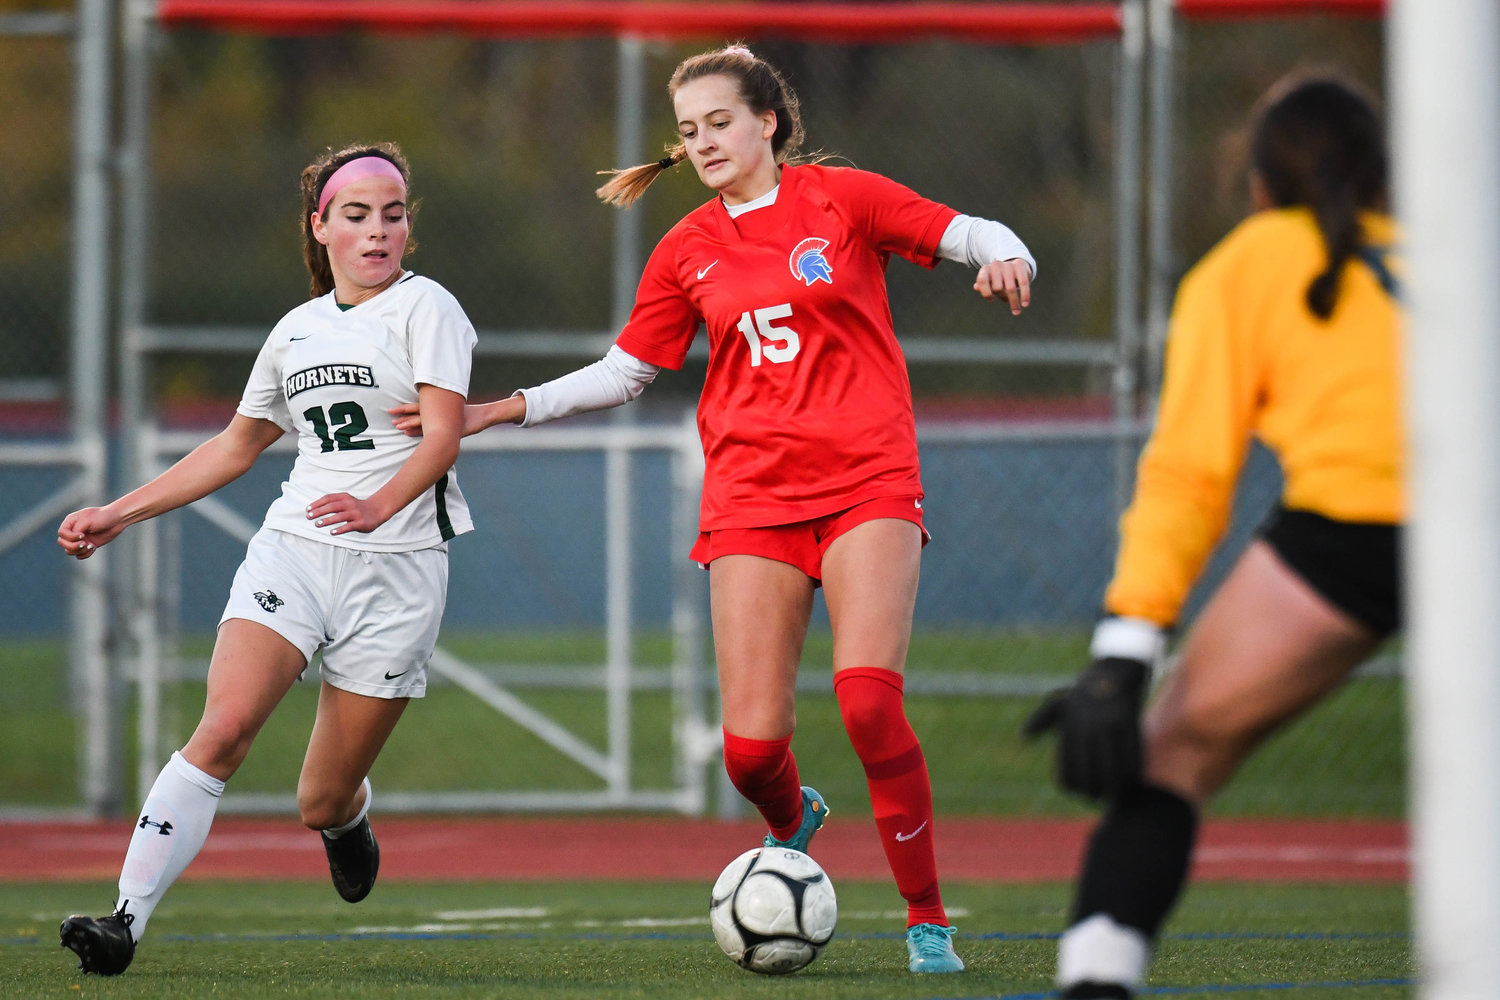 New Hartford’s Anna Rayhill moves the ball toward the net against Fayetteville-Manlius’ Sophia Leonard, left, during the game on Monday night in New Hartford. Rayhill scored twice and New Hartford won 4-0 on Senior Night, when nine players including Rayhill were honored.